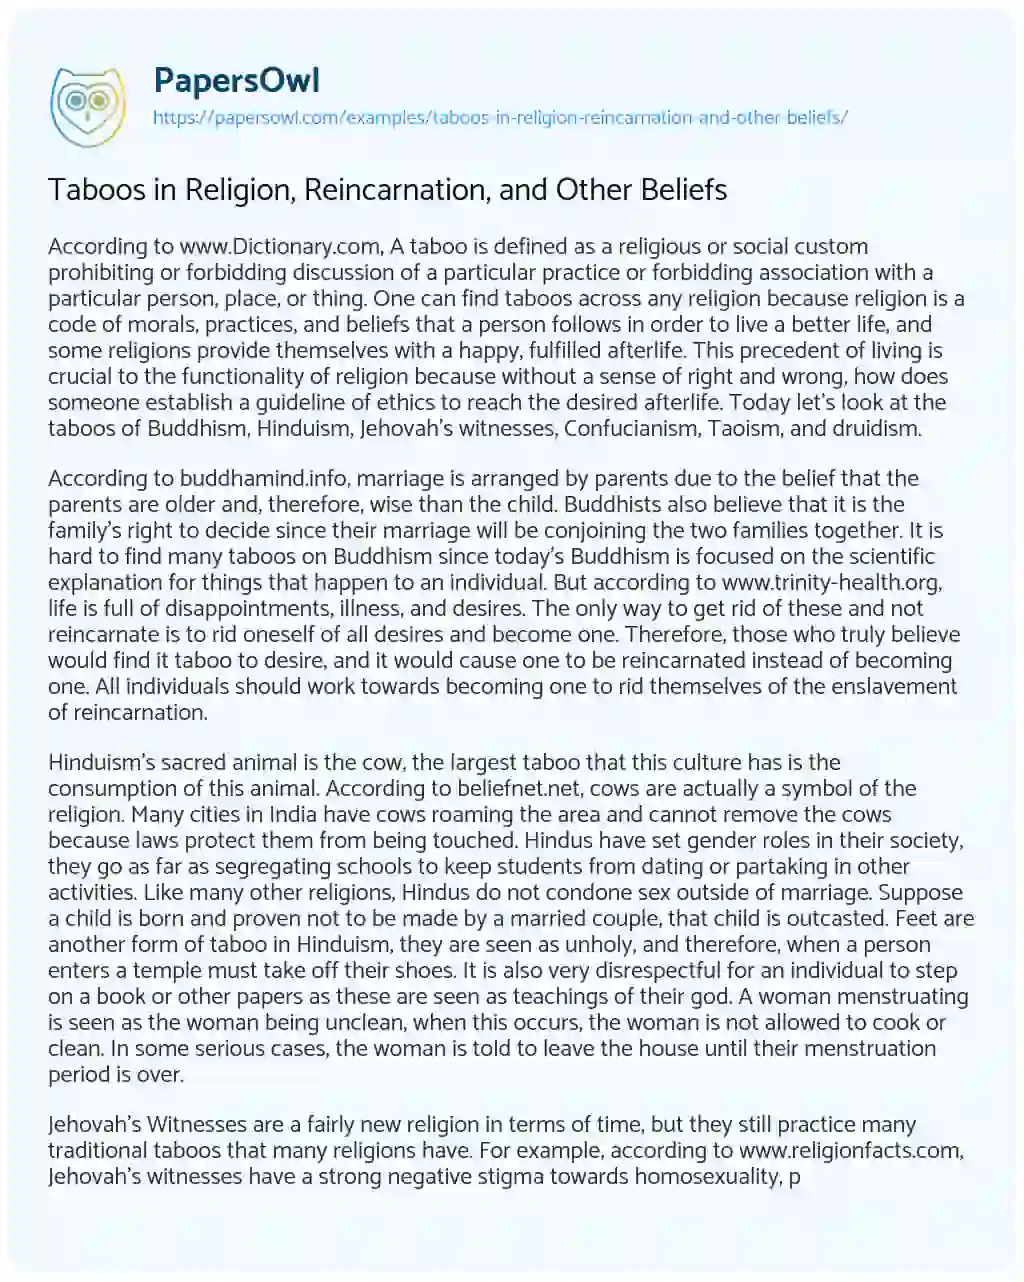 Essay on Taboos in Religion, Reincarnation, and other Beliefs